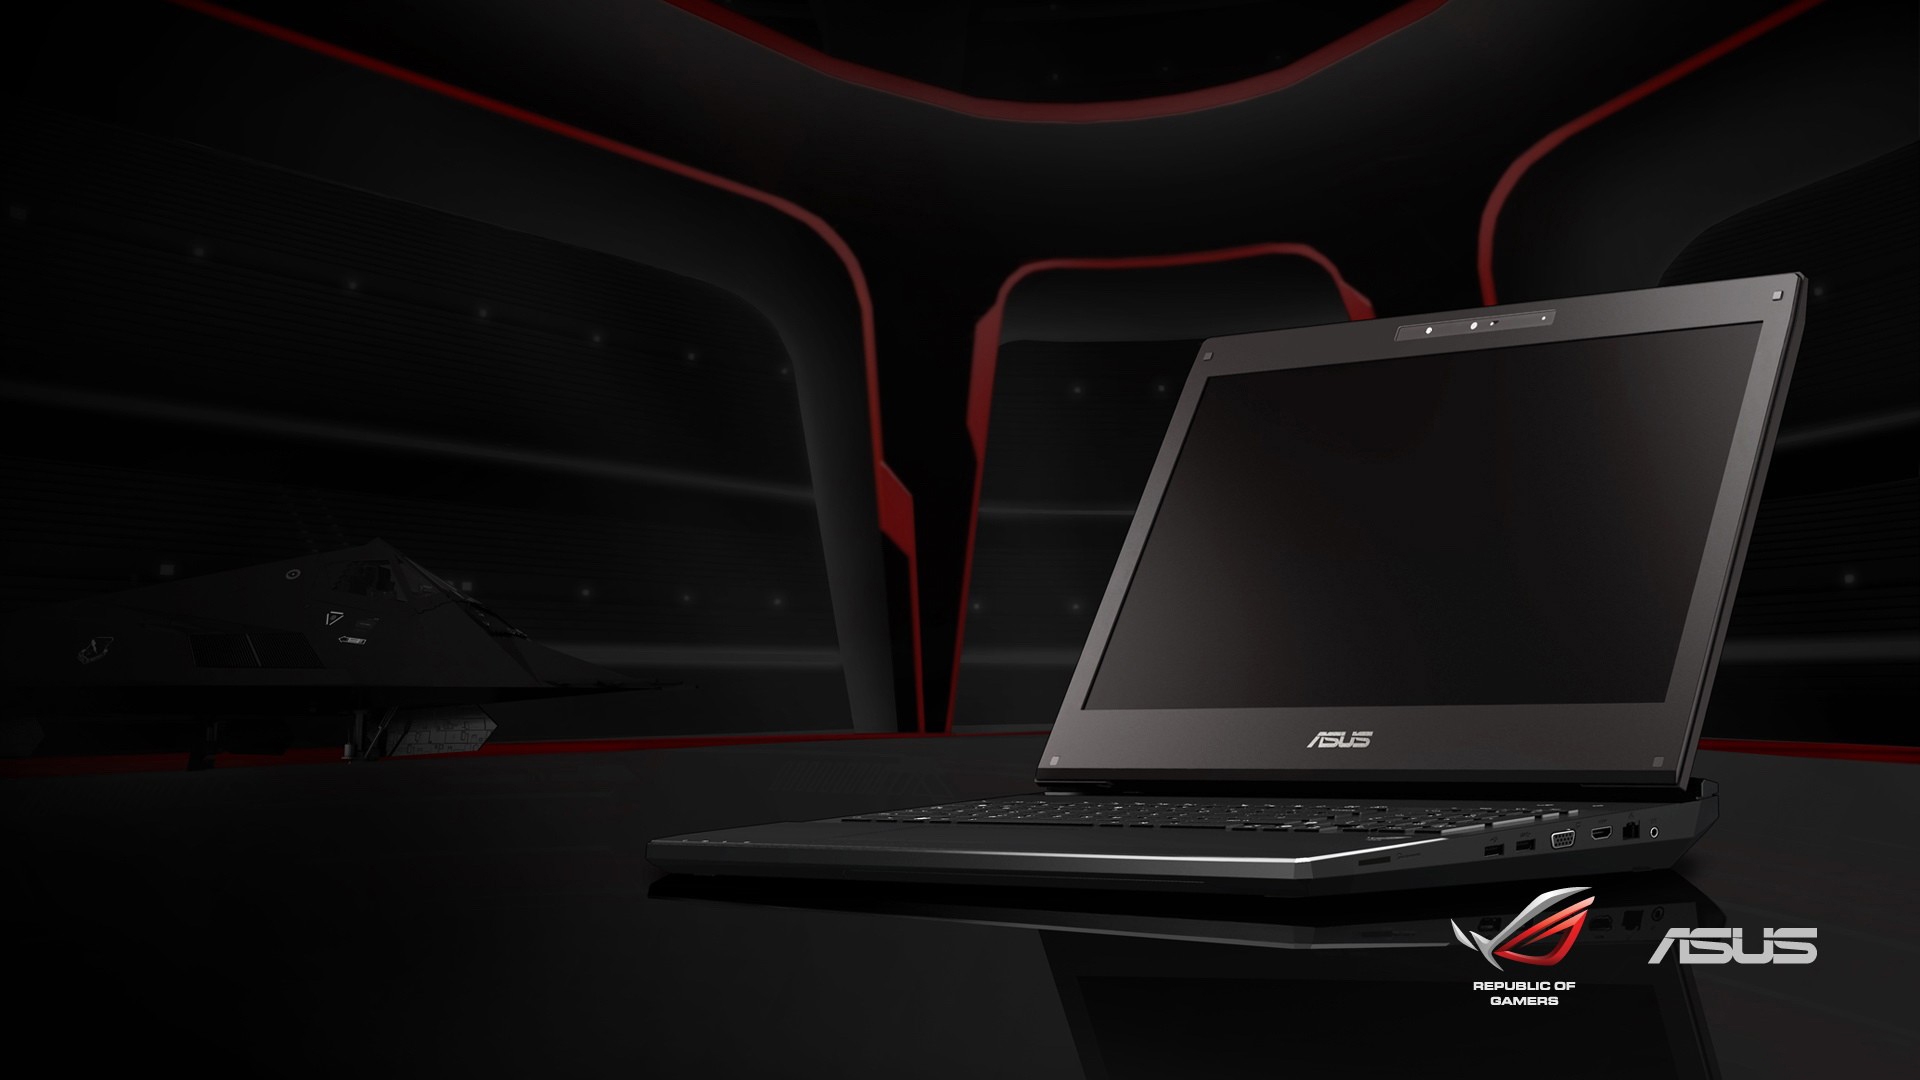 ASUS Notebook   High Definition Wallpapers   HD wallpapers